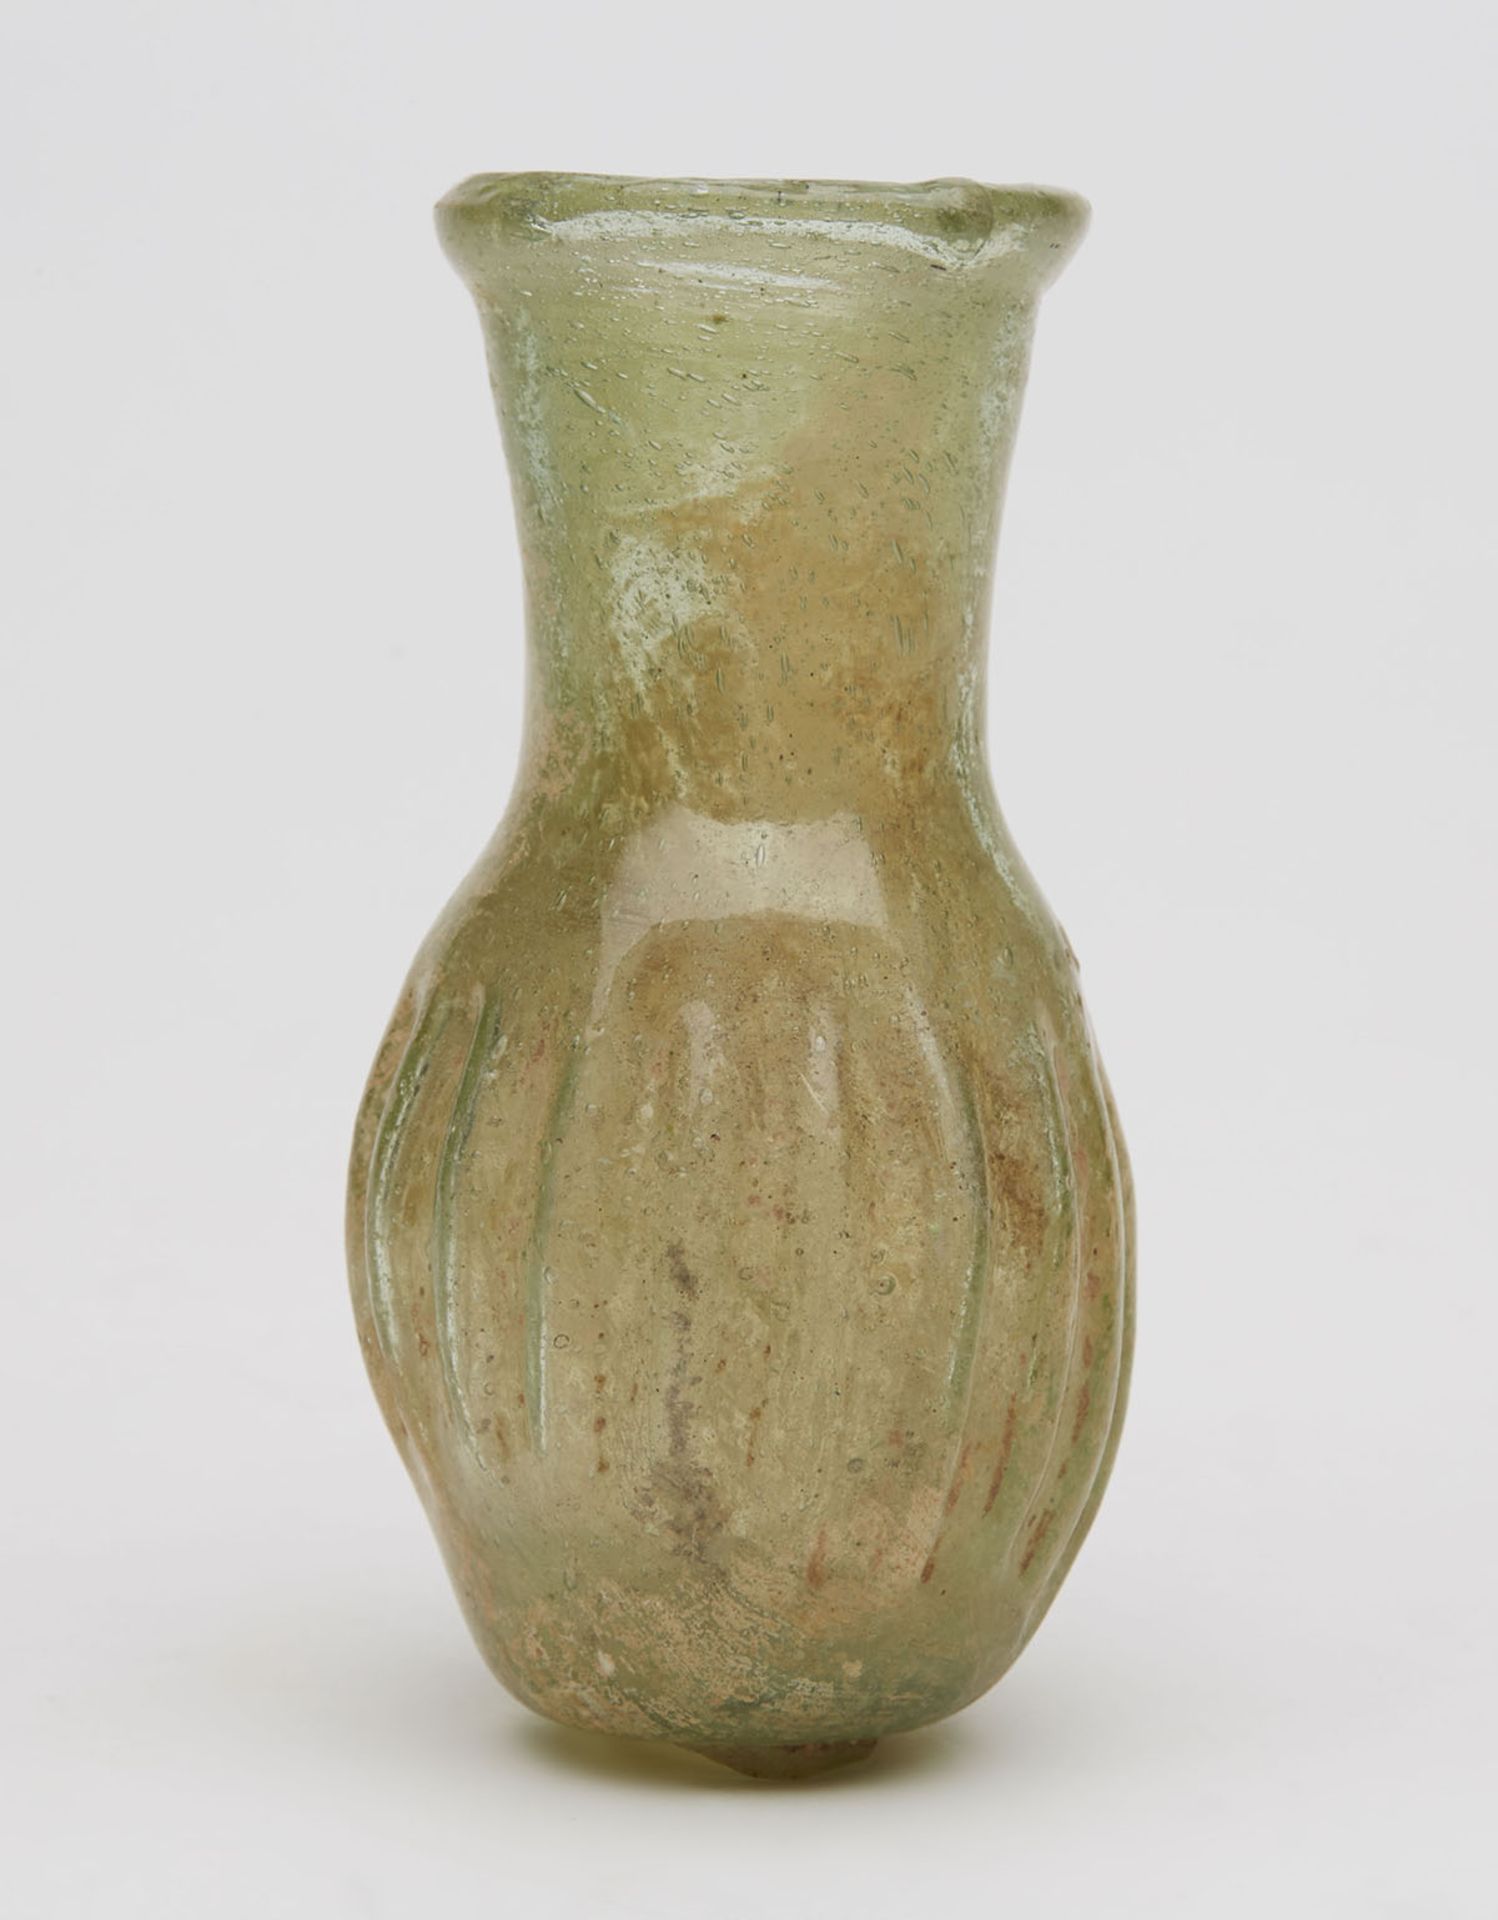 Ancient Roman Green Glass Ribbed Bottle 2Nd Century Ad - Image 4 of 6